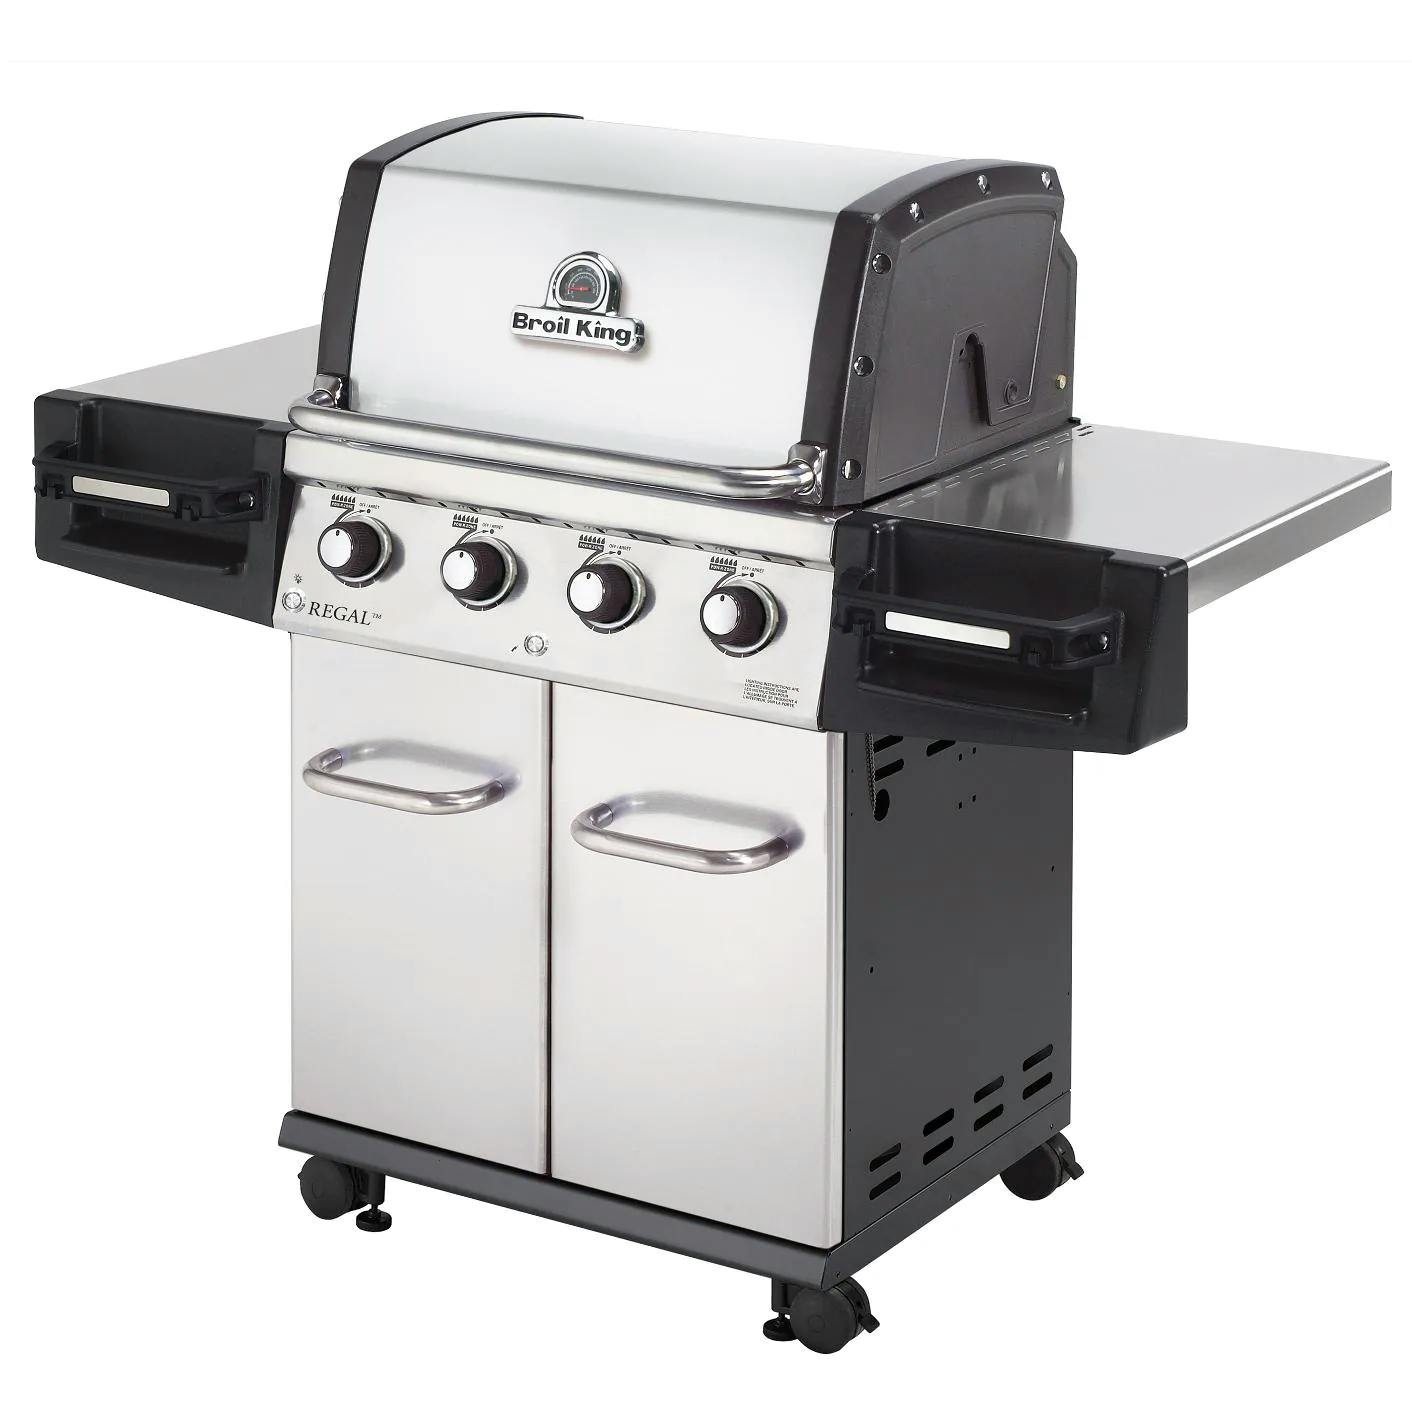 Broil King Regal S420 Pro 4-Burner Gas Grill Stainless Steel · Propane